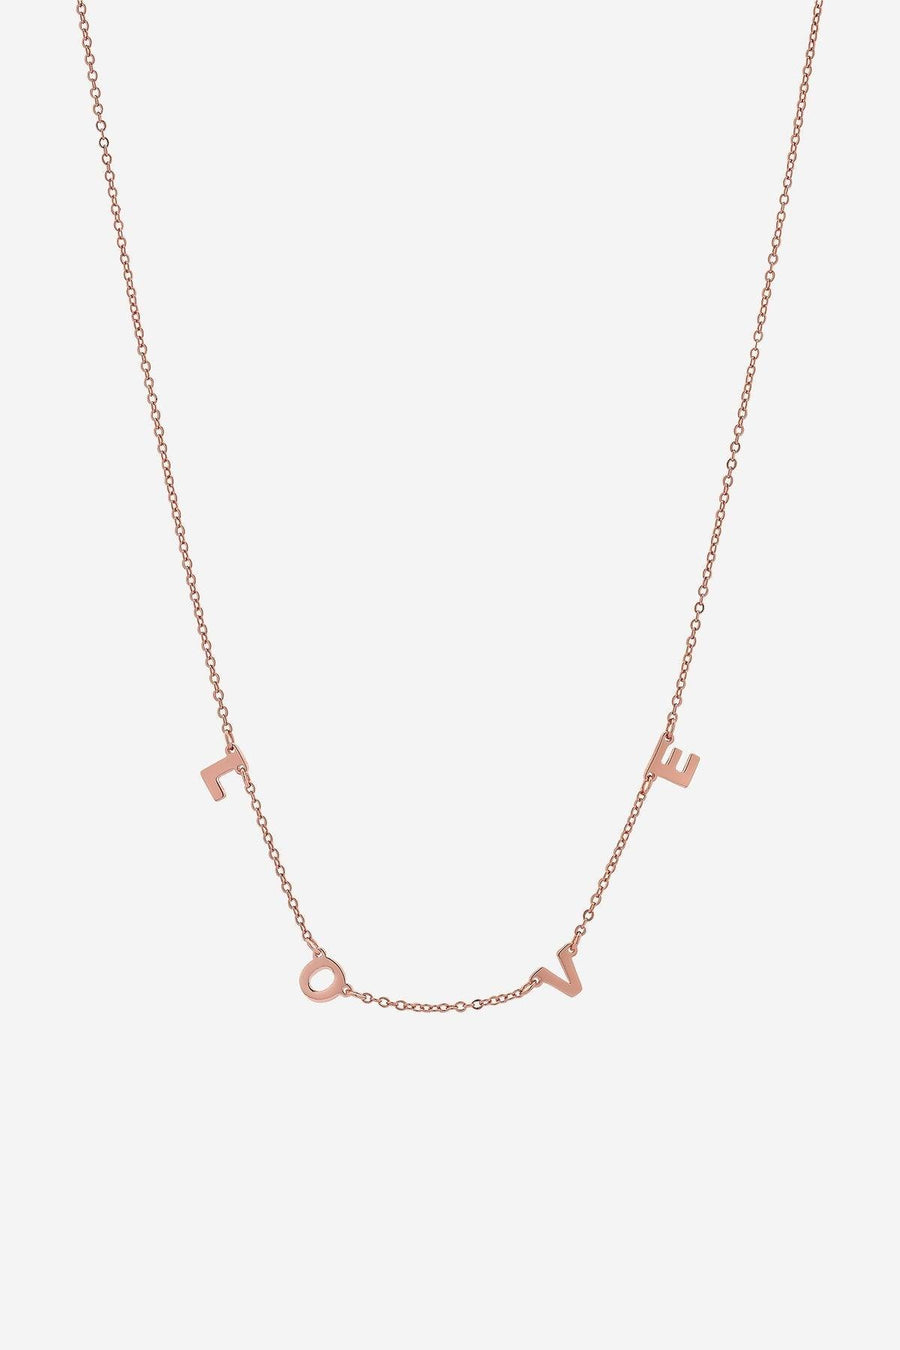 Shop Amour Necklace - At Kohl and Soda | Ready To Ship!